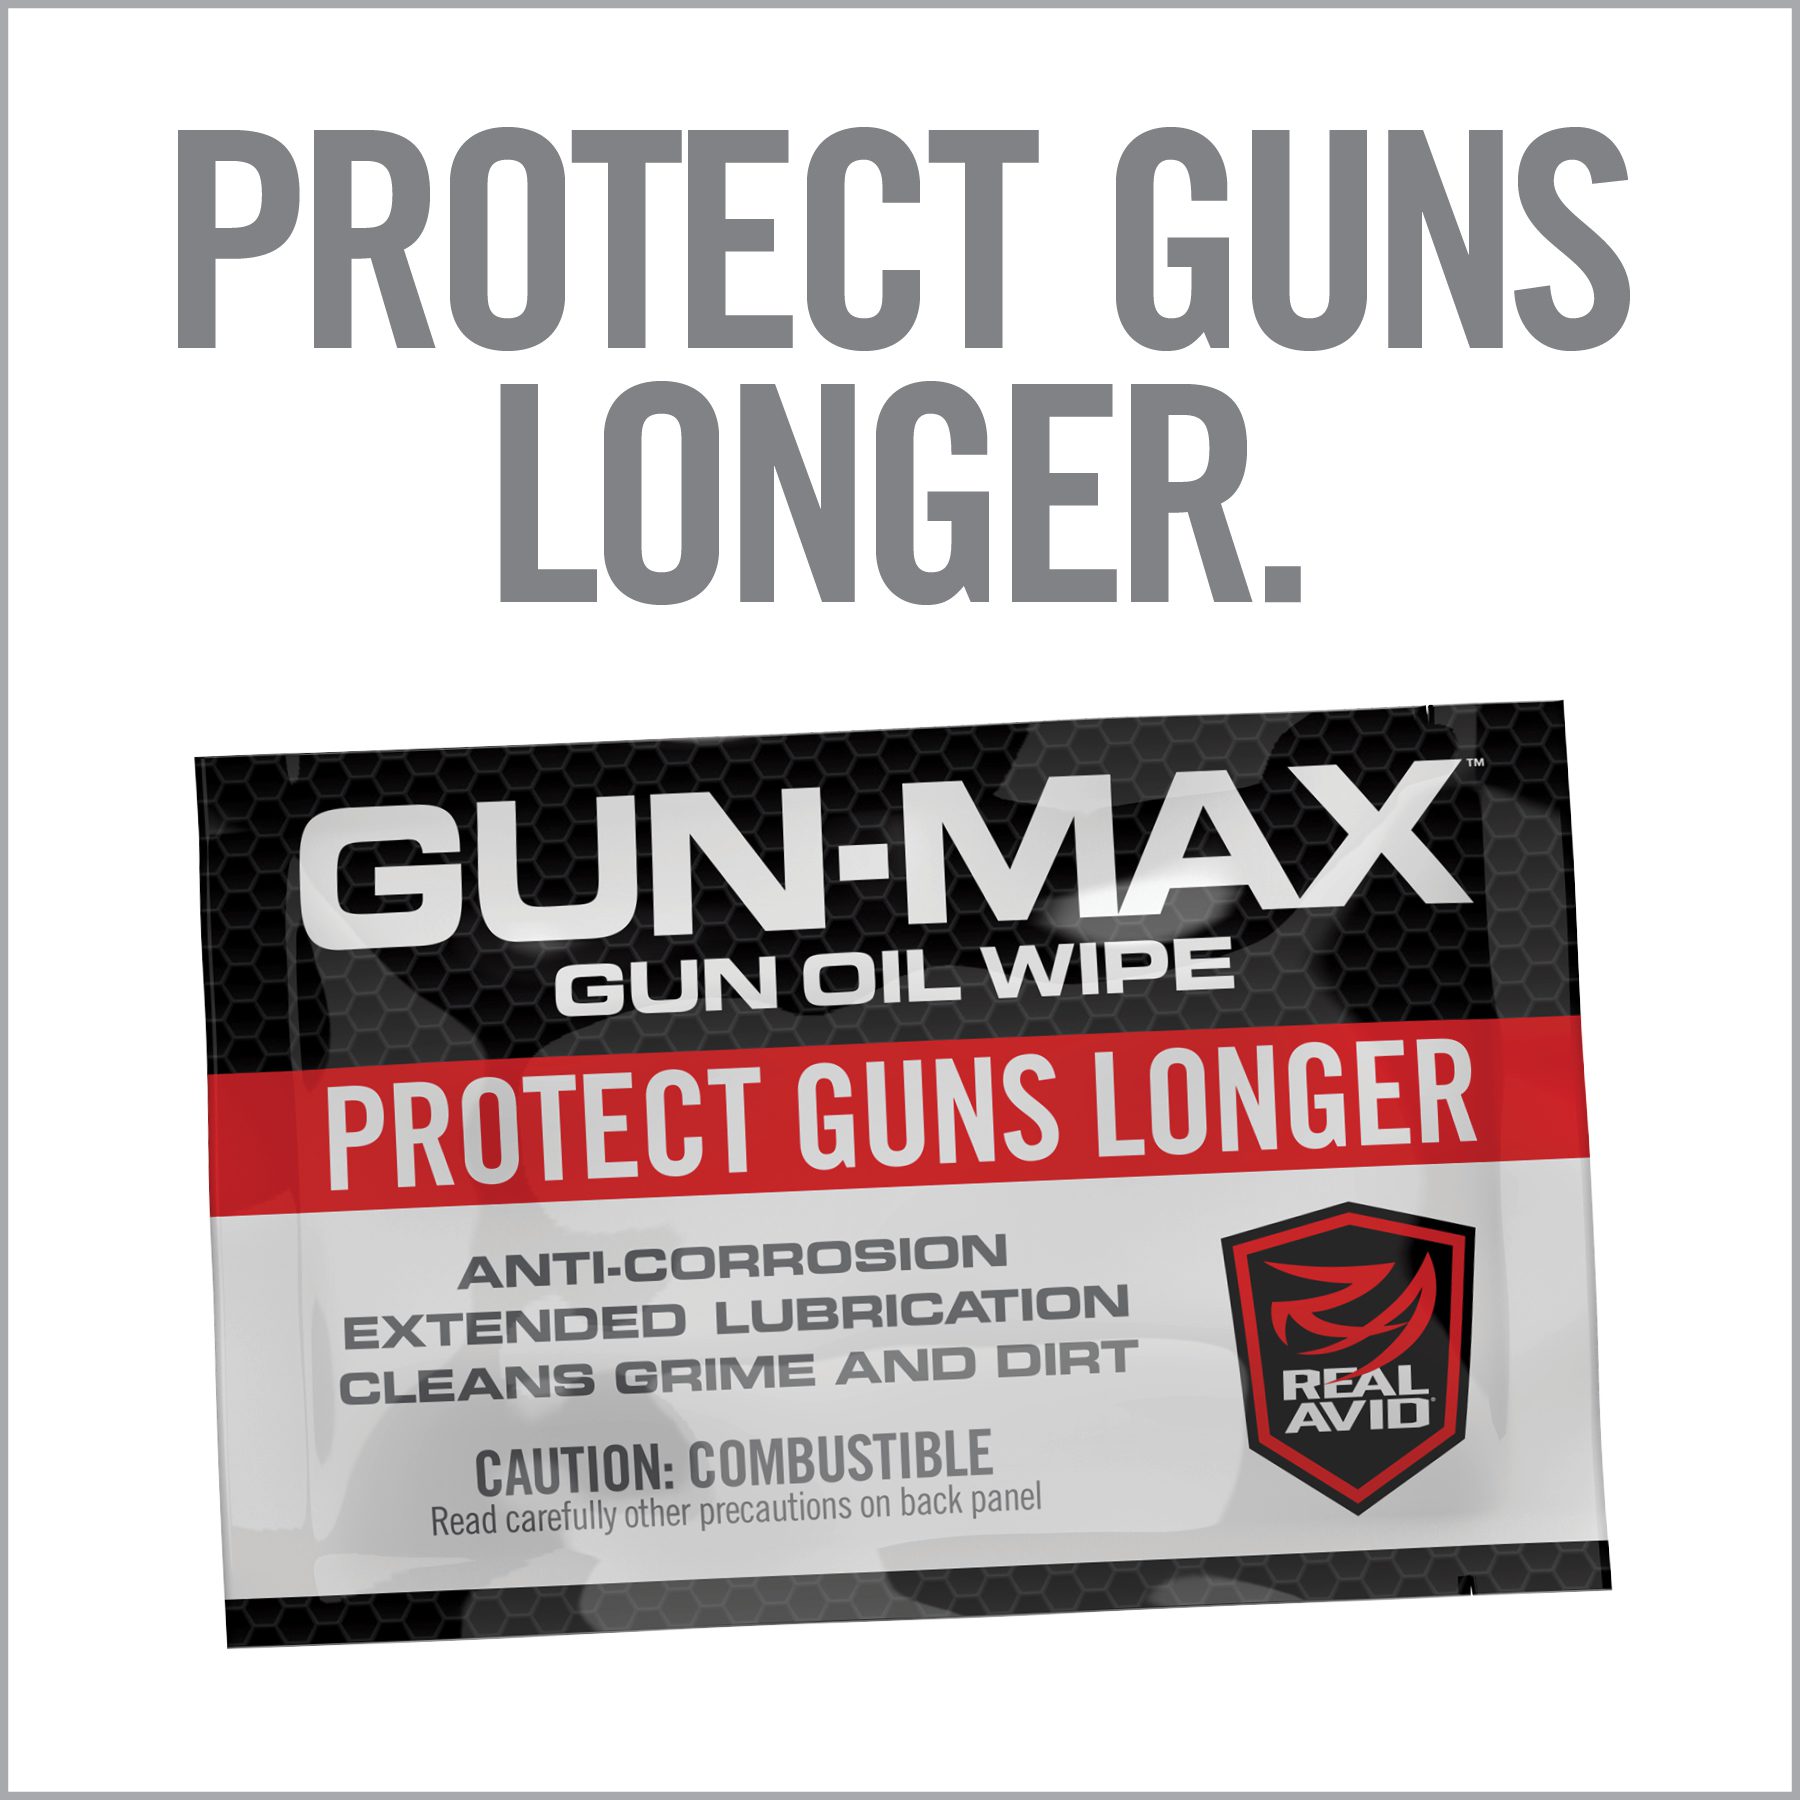 an advertisement for gun - max is shown in this image